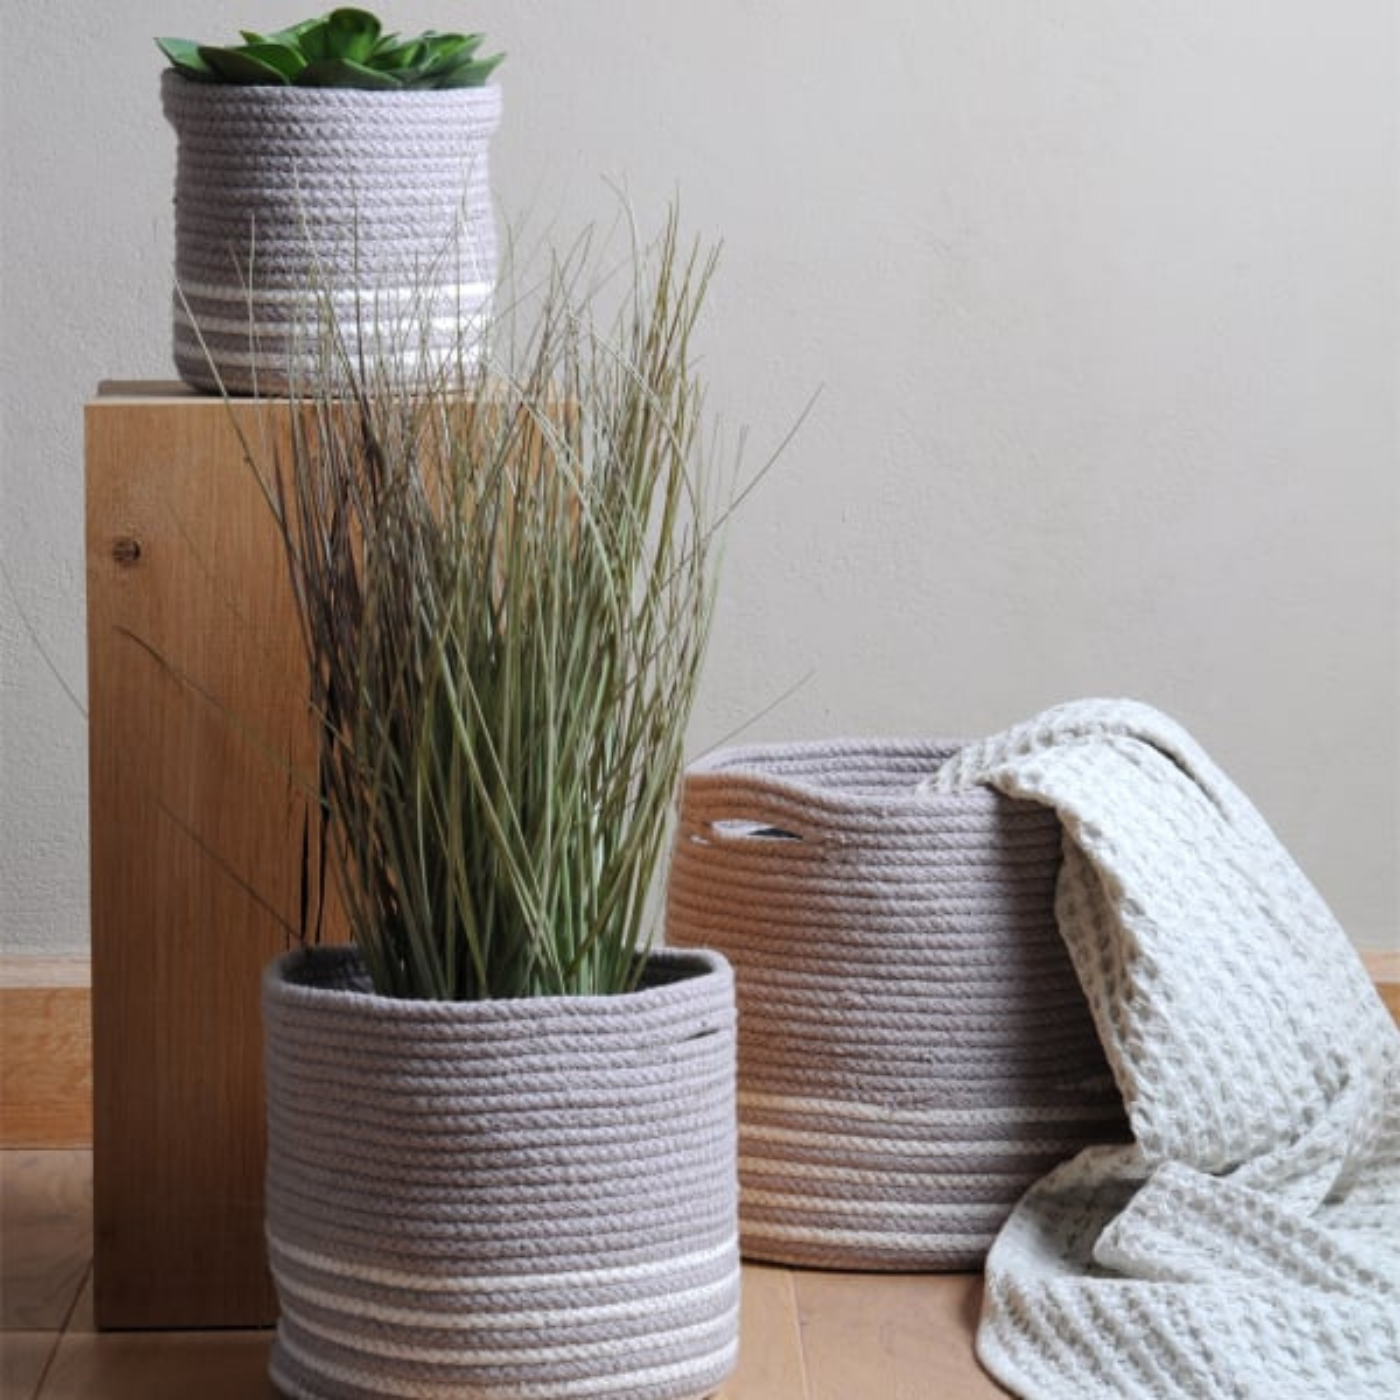 Set of 3 planters in soft grey with white stripe, 3 sizes from Large, Medium and small in a lifestyle display